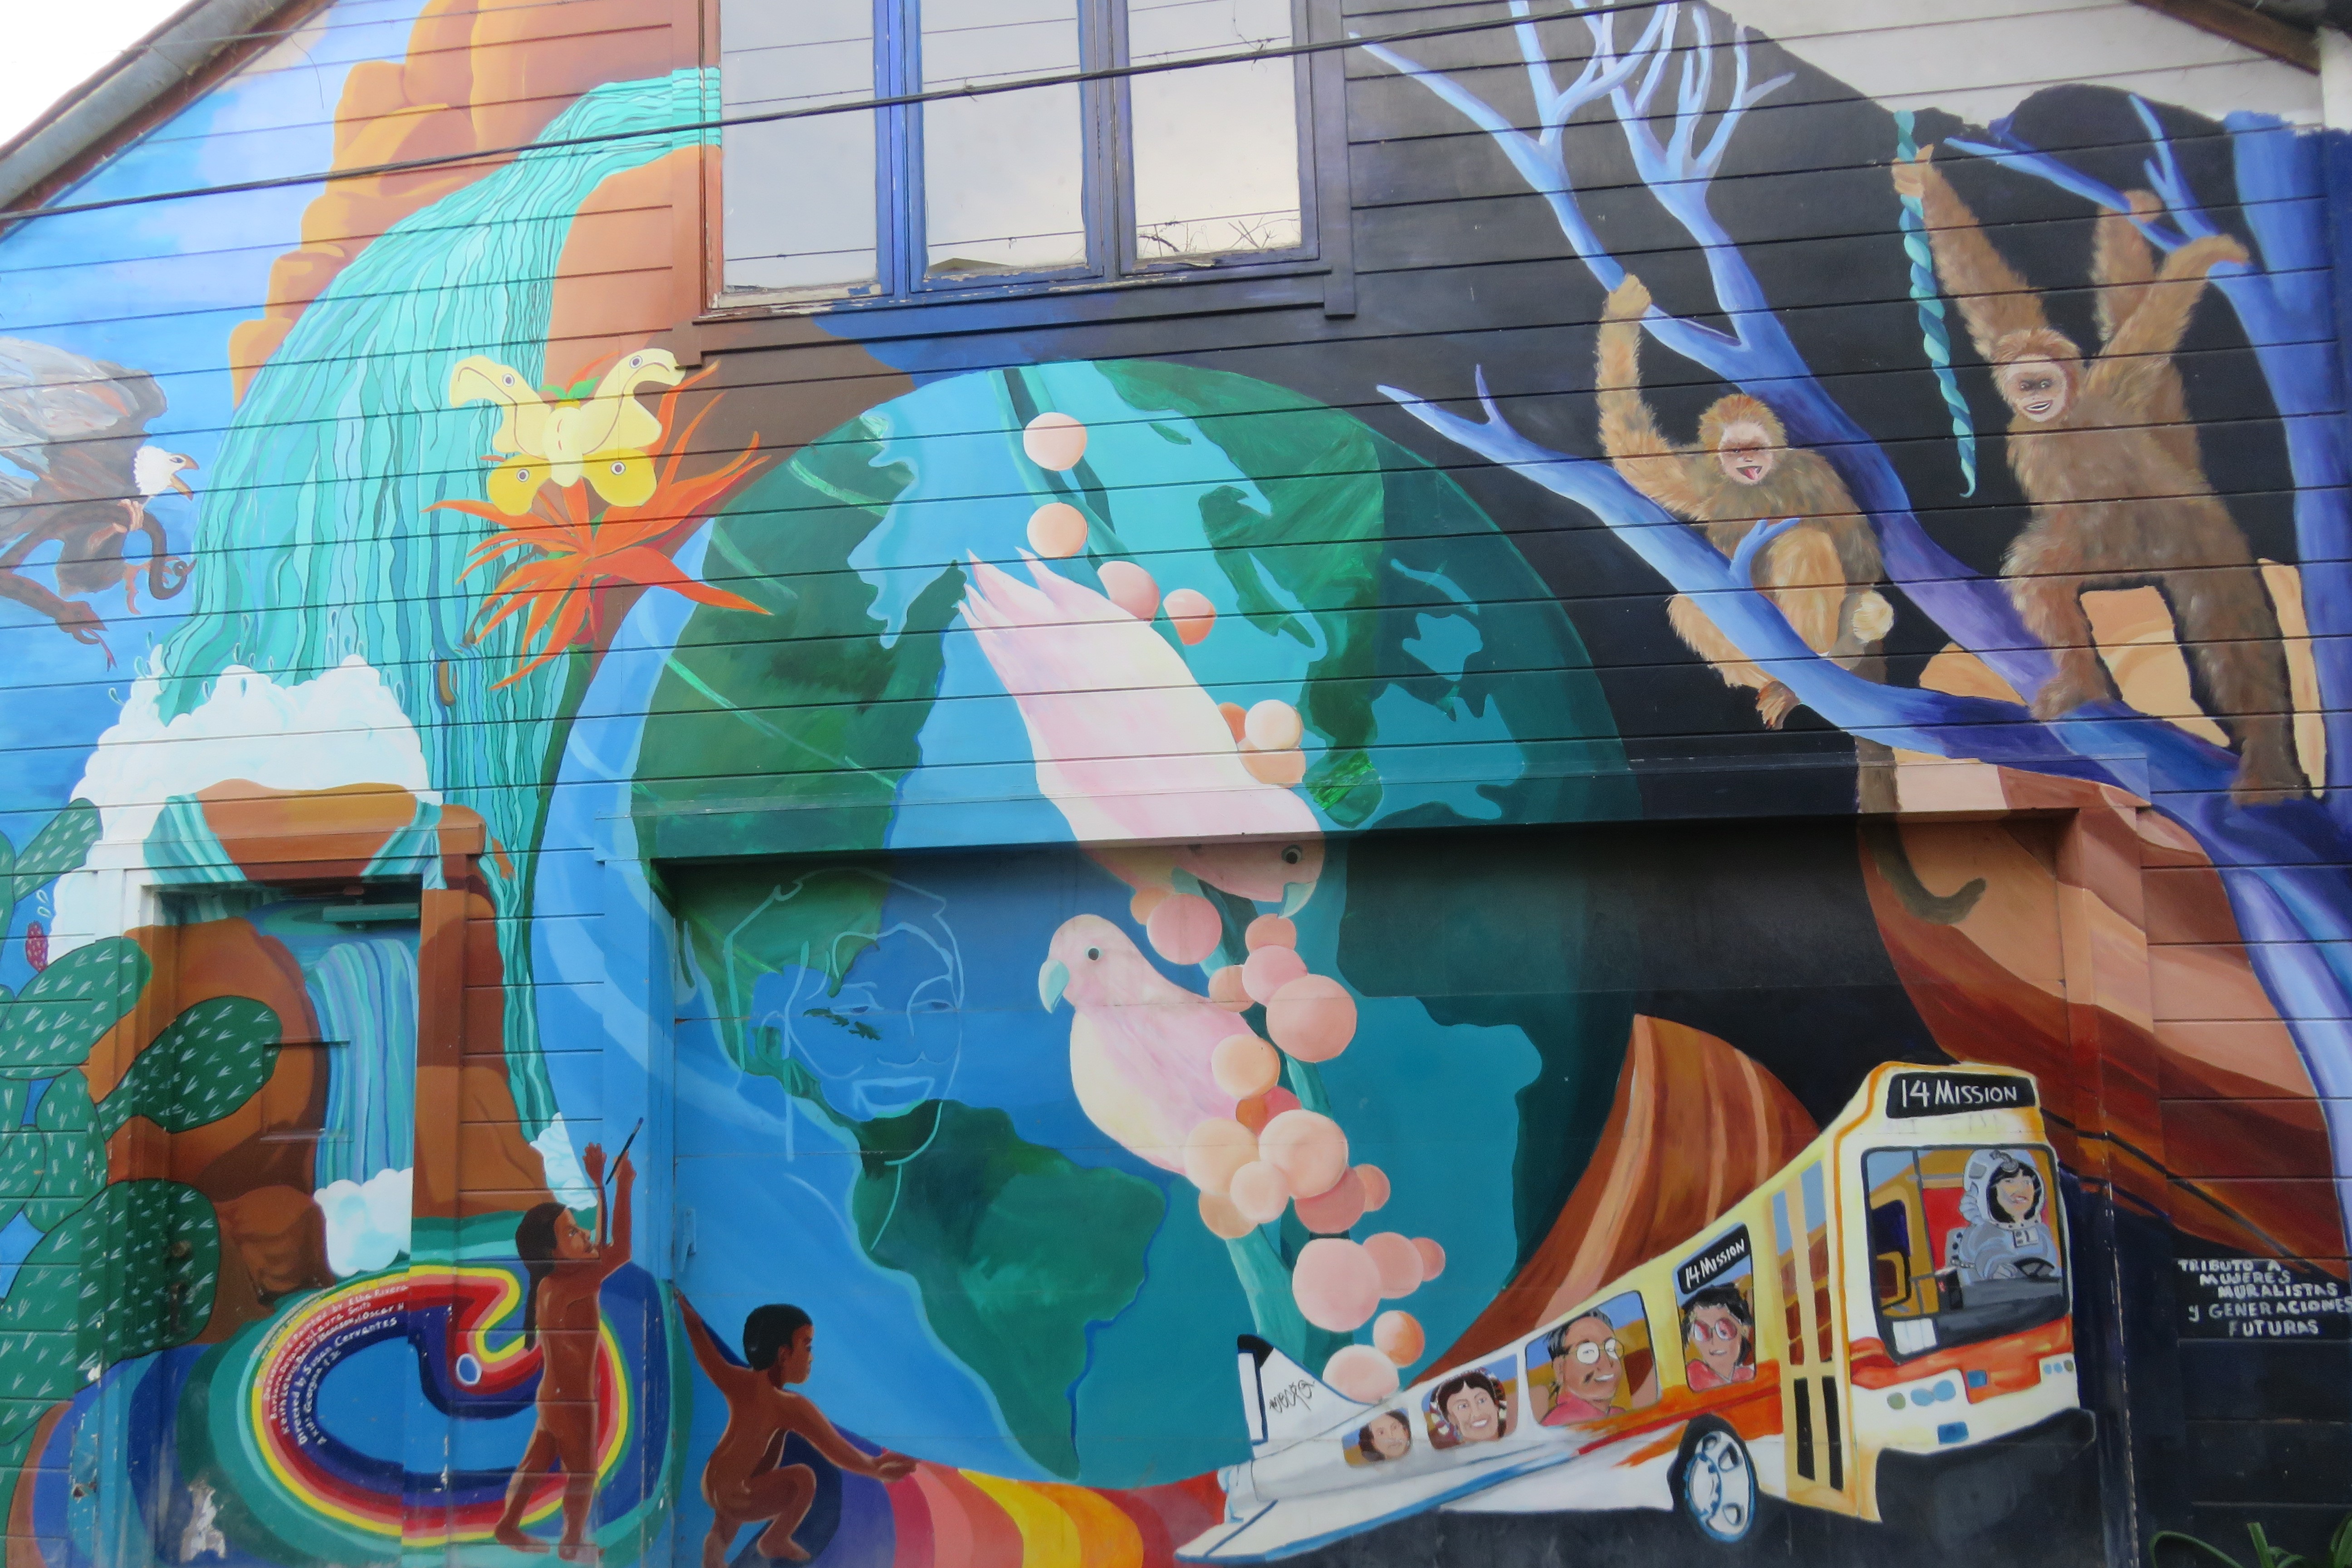 A mural in San Francisco’s Mission District. / Photo by Fabrice Florin on Flickr. Used under CC 2.0.